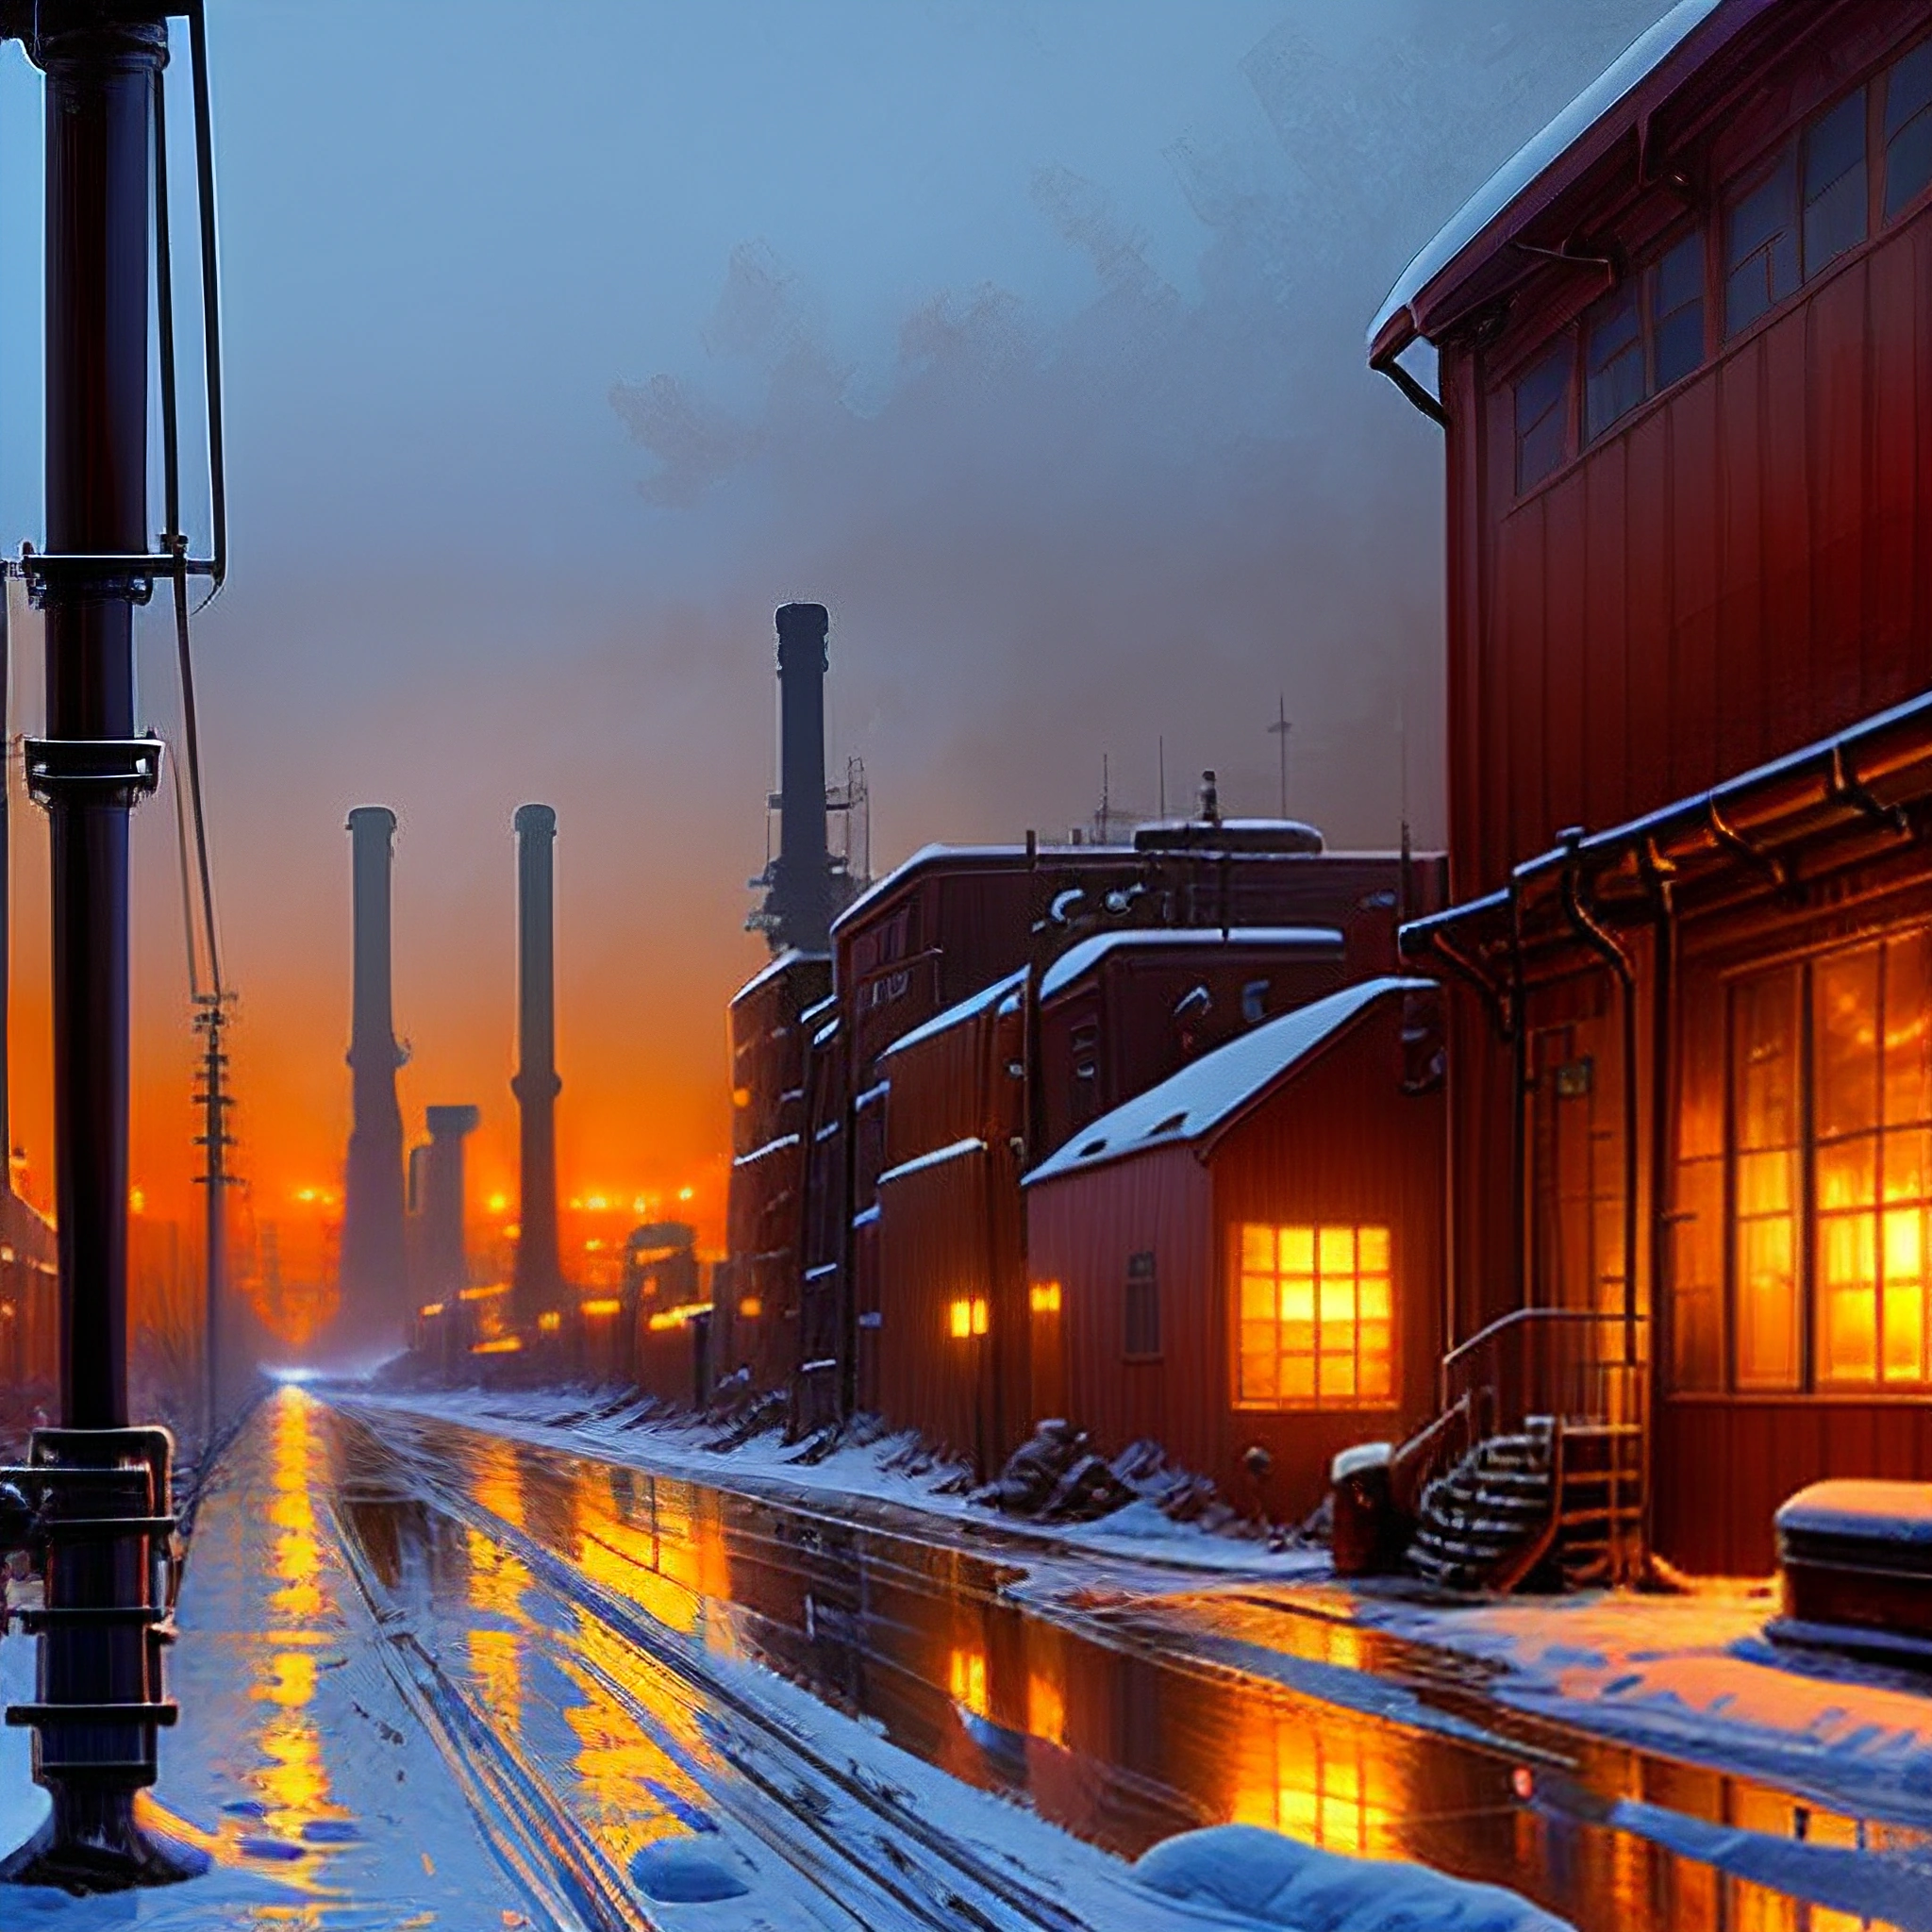 snowy street scene with a train passing by a factory